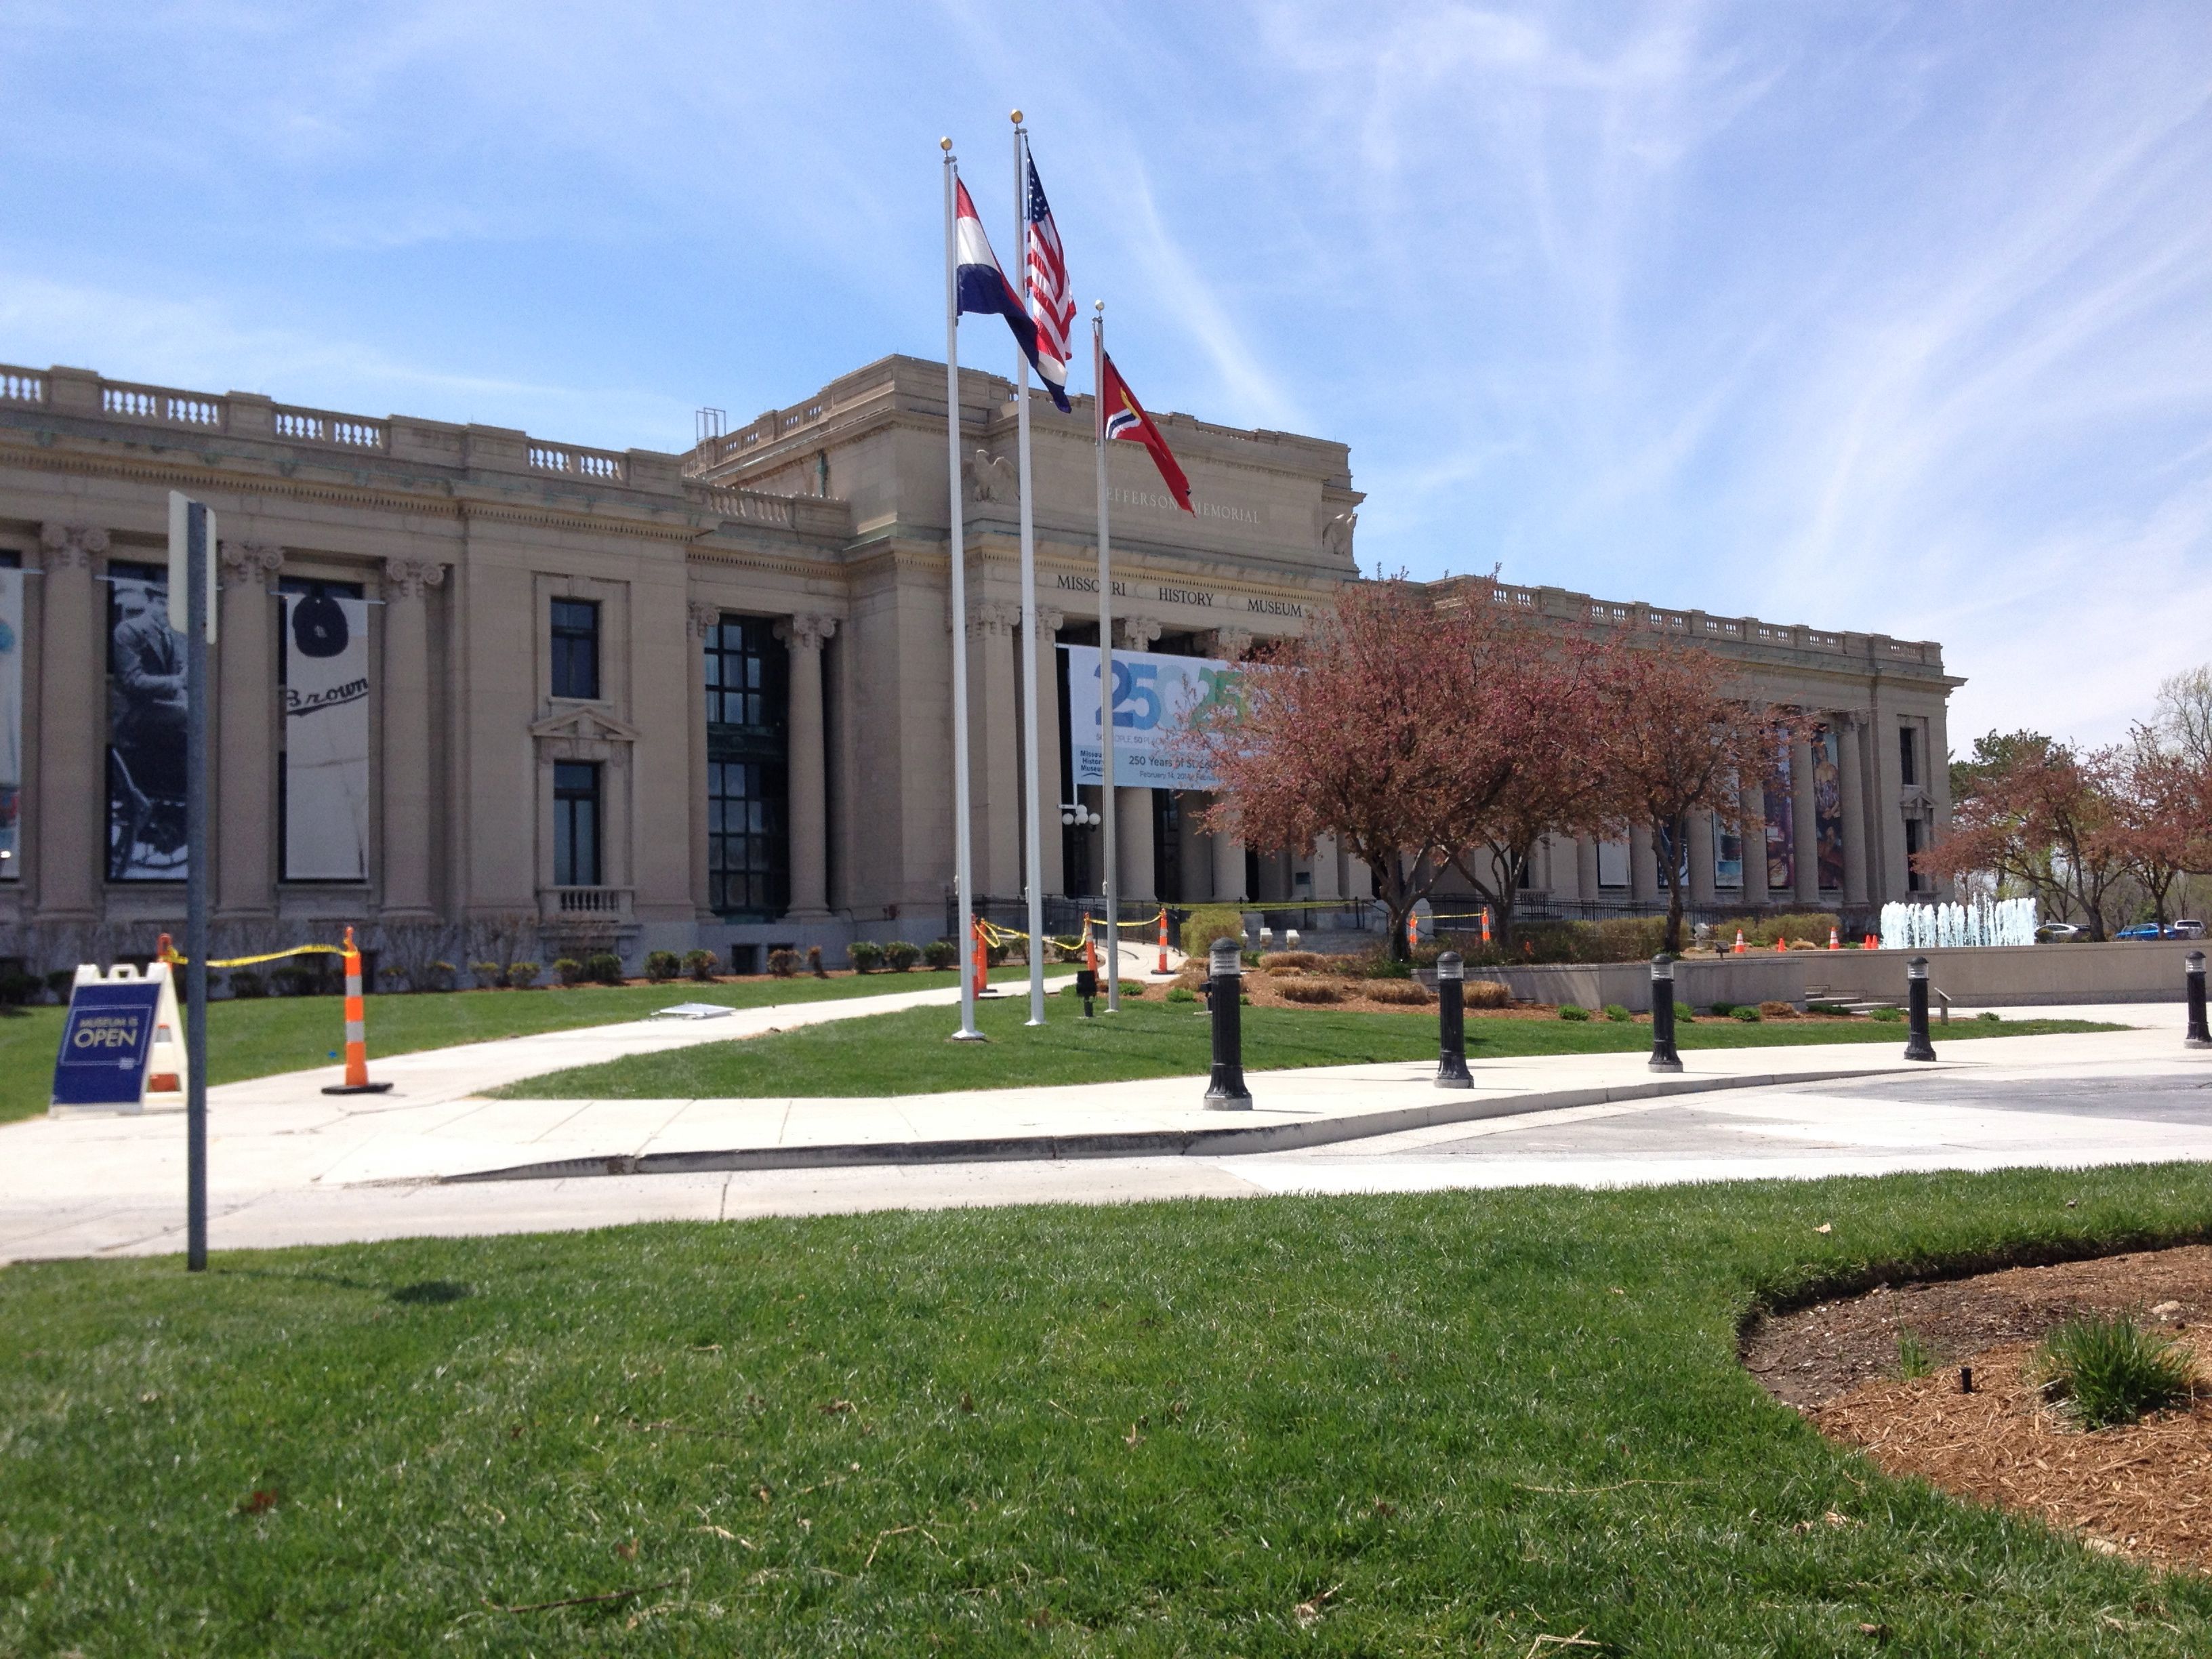 A Guide to the Missouri History Museum in St. Louis